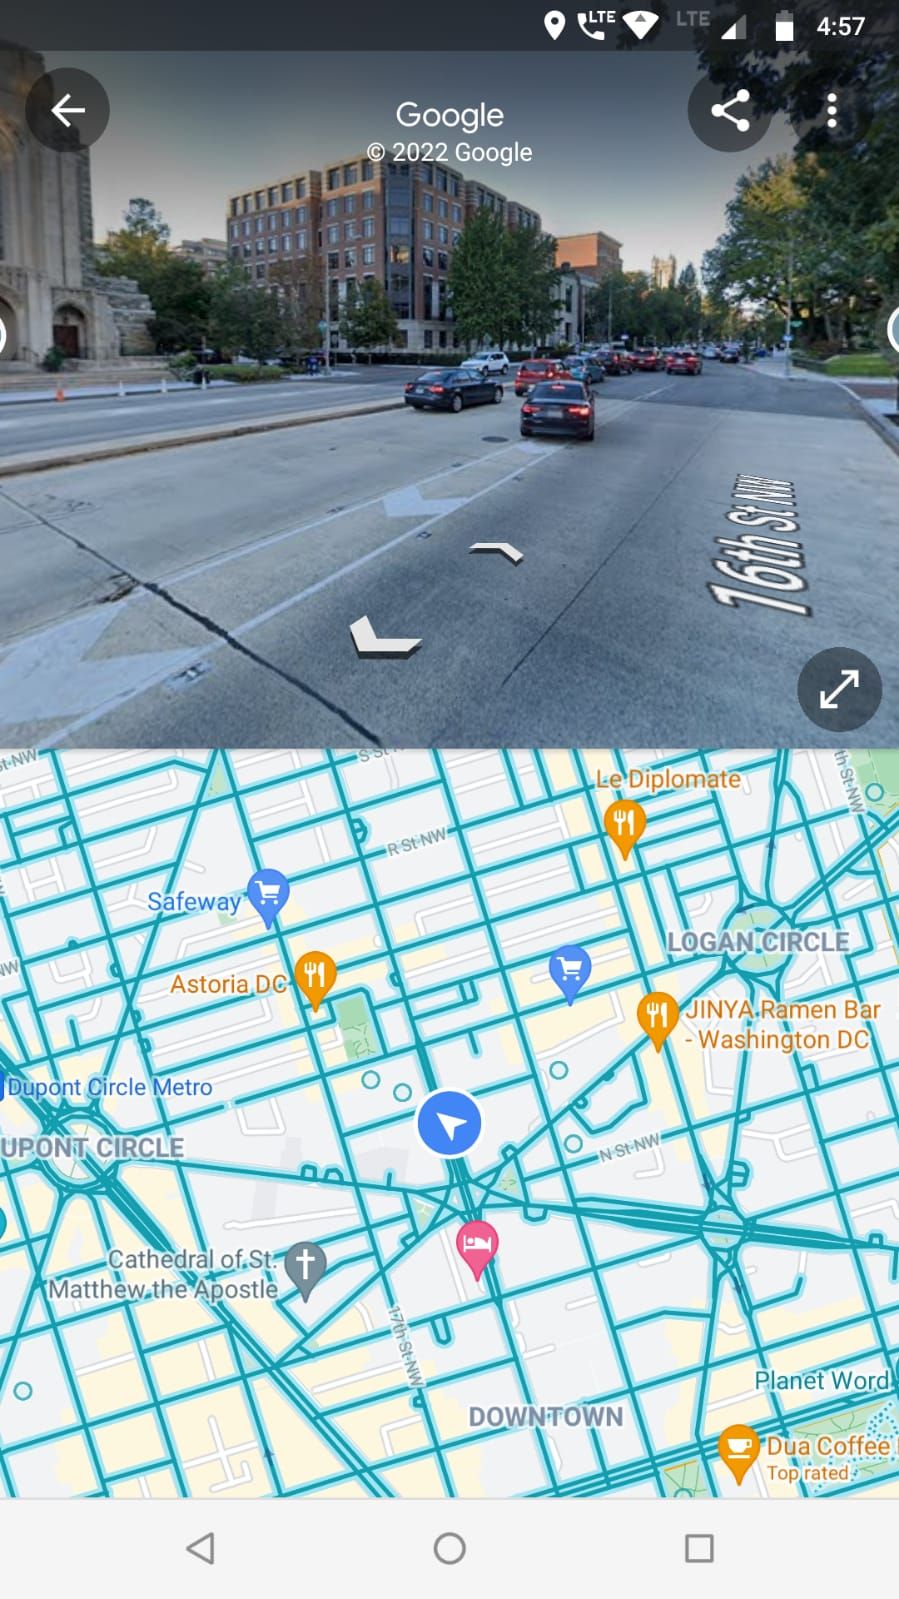 Accessing the Street View images on on Google Maps Android